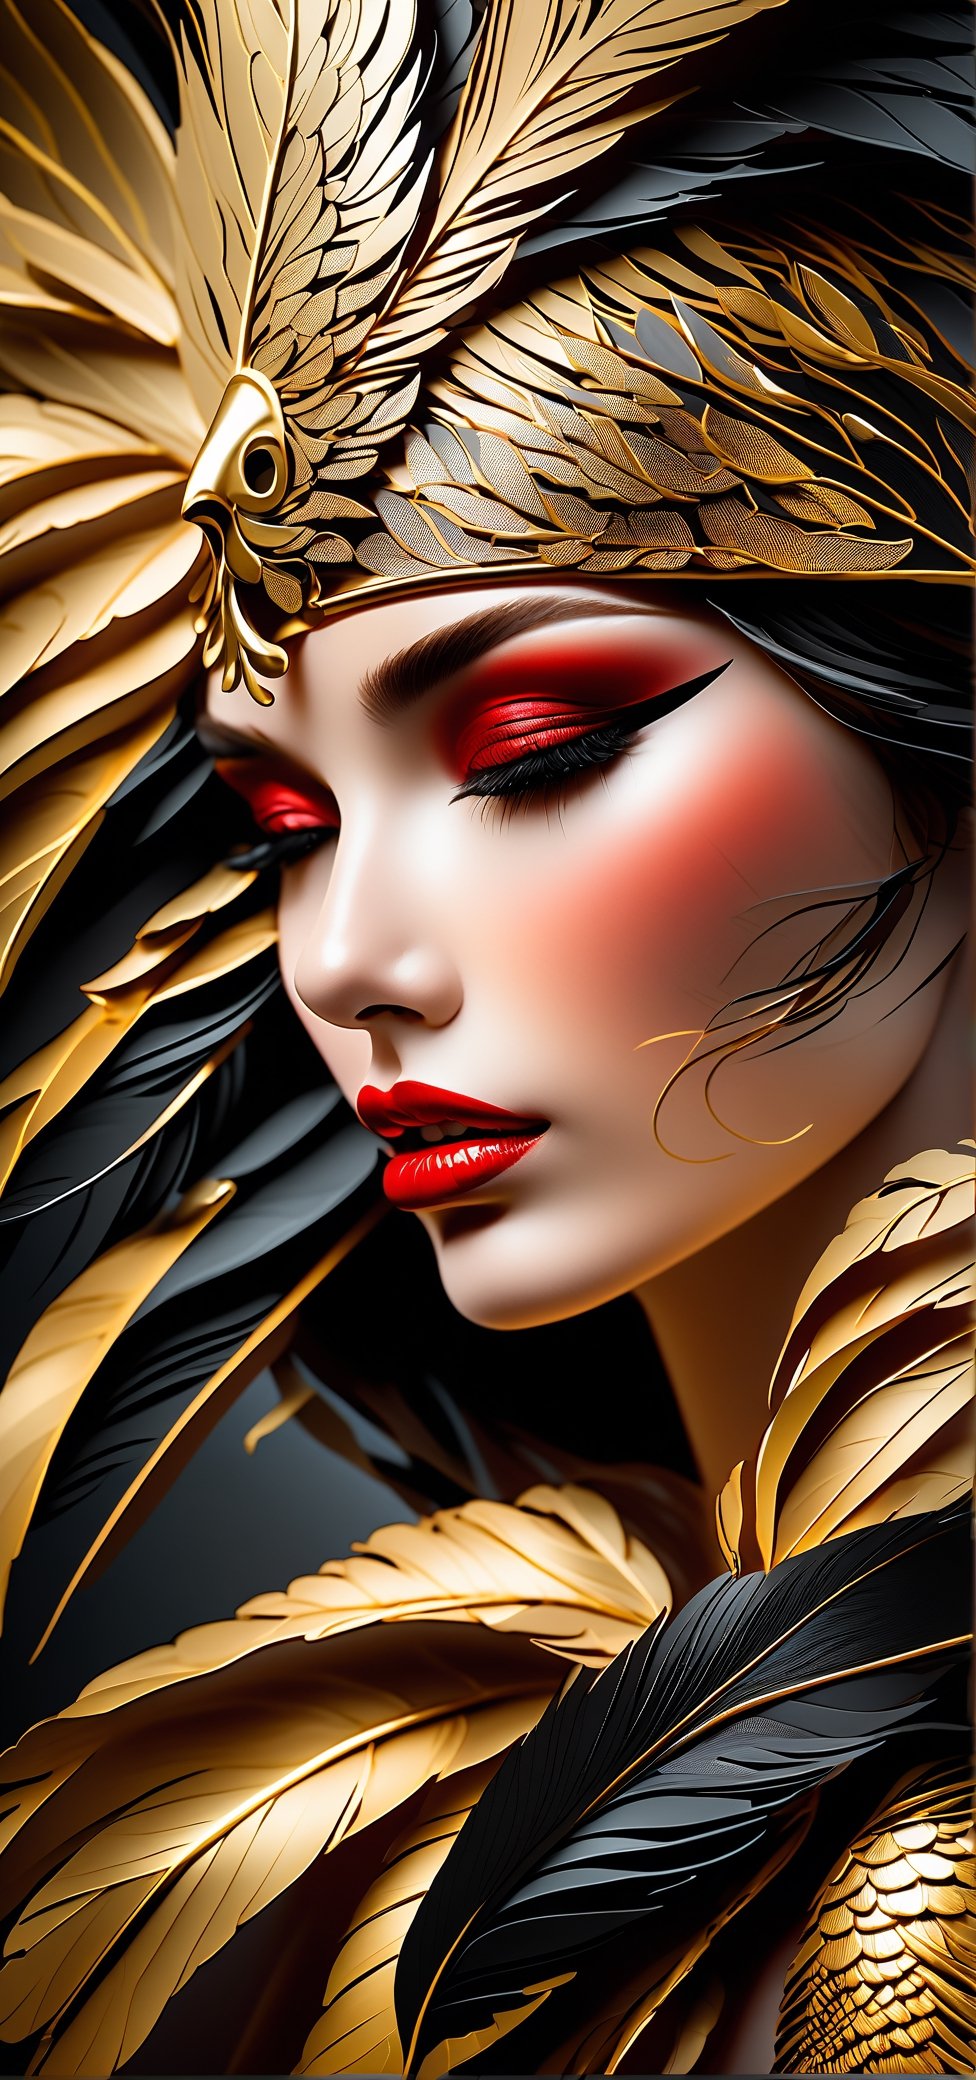 A stunning and detailed portrayal of a woman with red lipstick and a gold , black feather, capturing the essence of beauty in UHD 4K. This gorgeous digital art, reminiscent of the mastery of Karol Bak and Alessandro Pautasso, exemplifies airbrush techniques and glossy textures, creating a truly beautiful and detailed digital artwork.